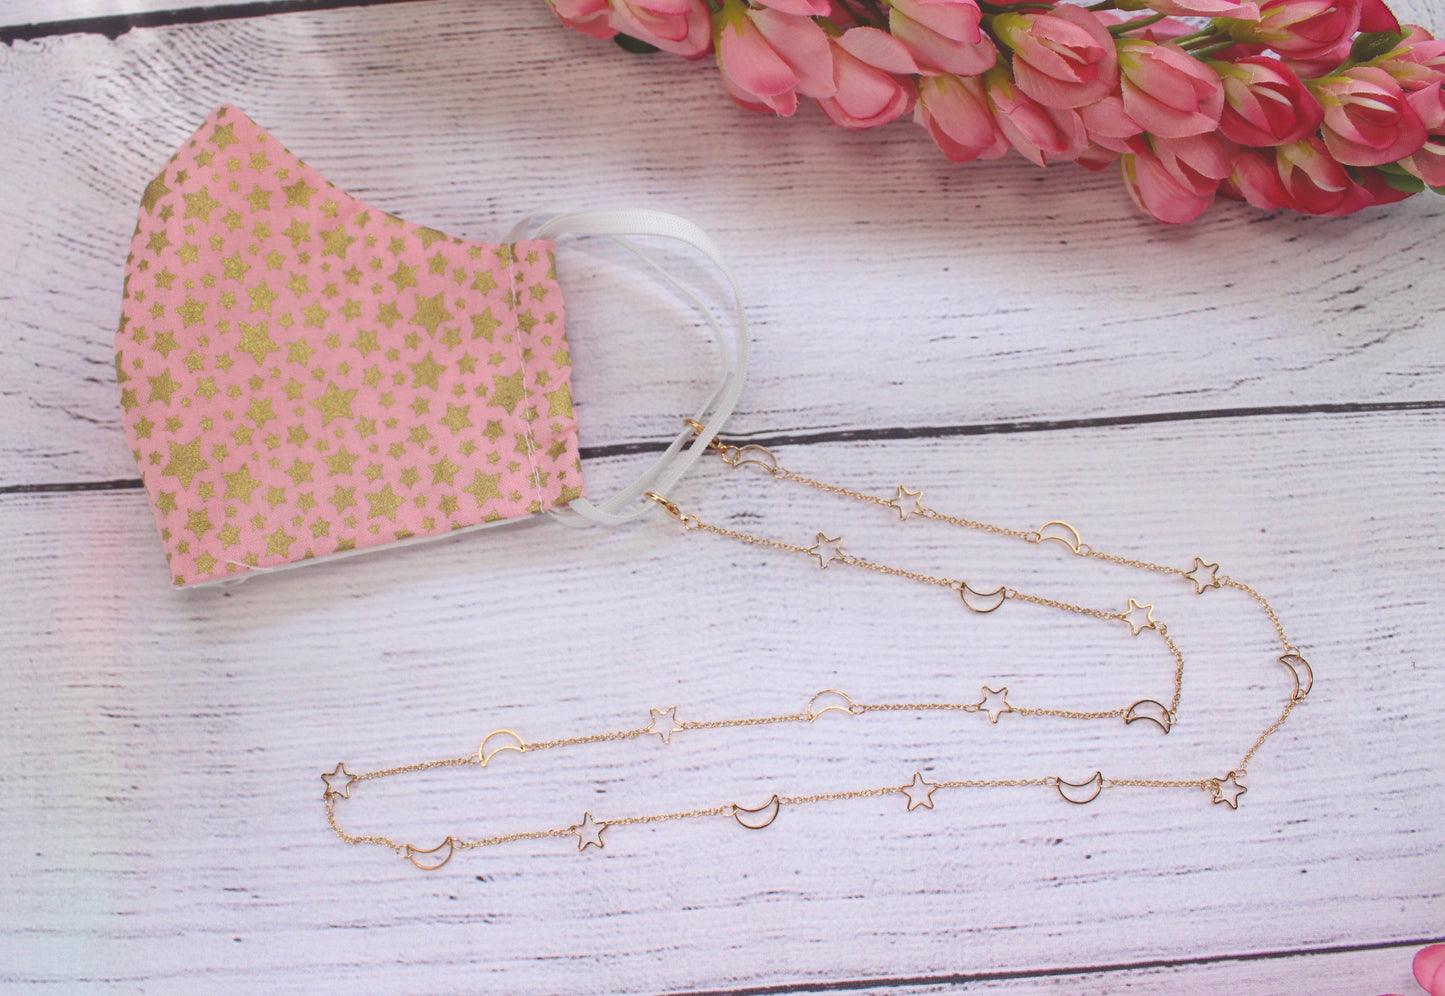 Face mask lanyard - The moon and the stars. Gold color